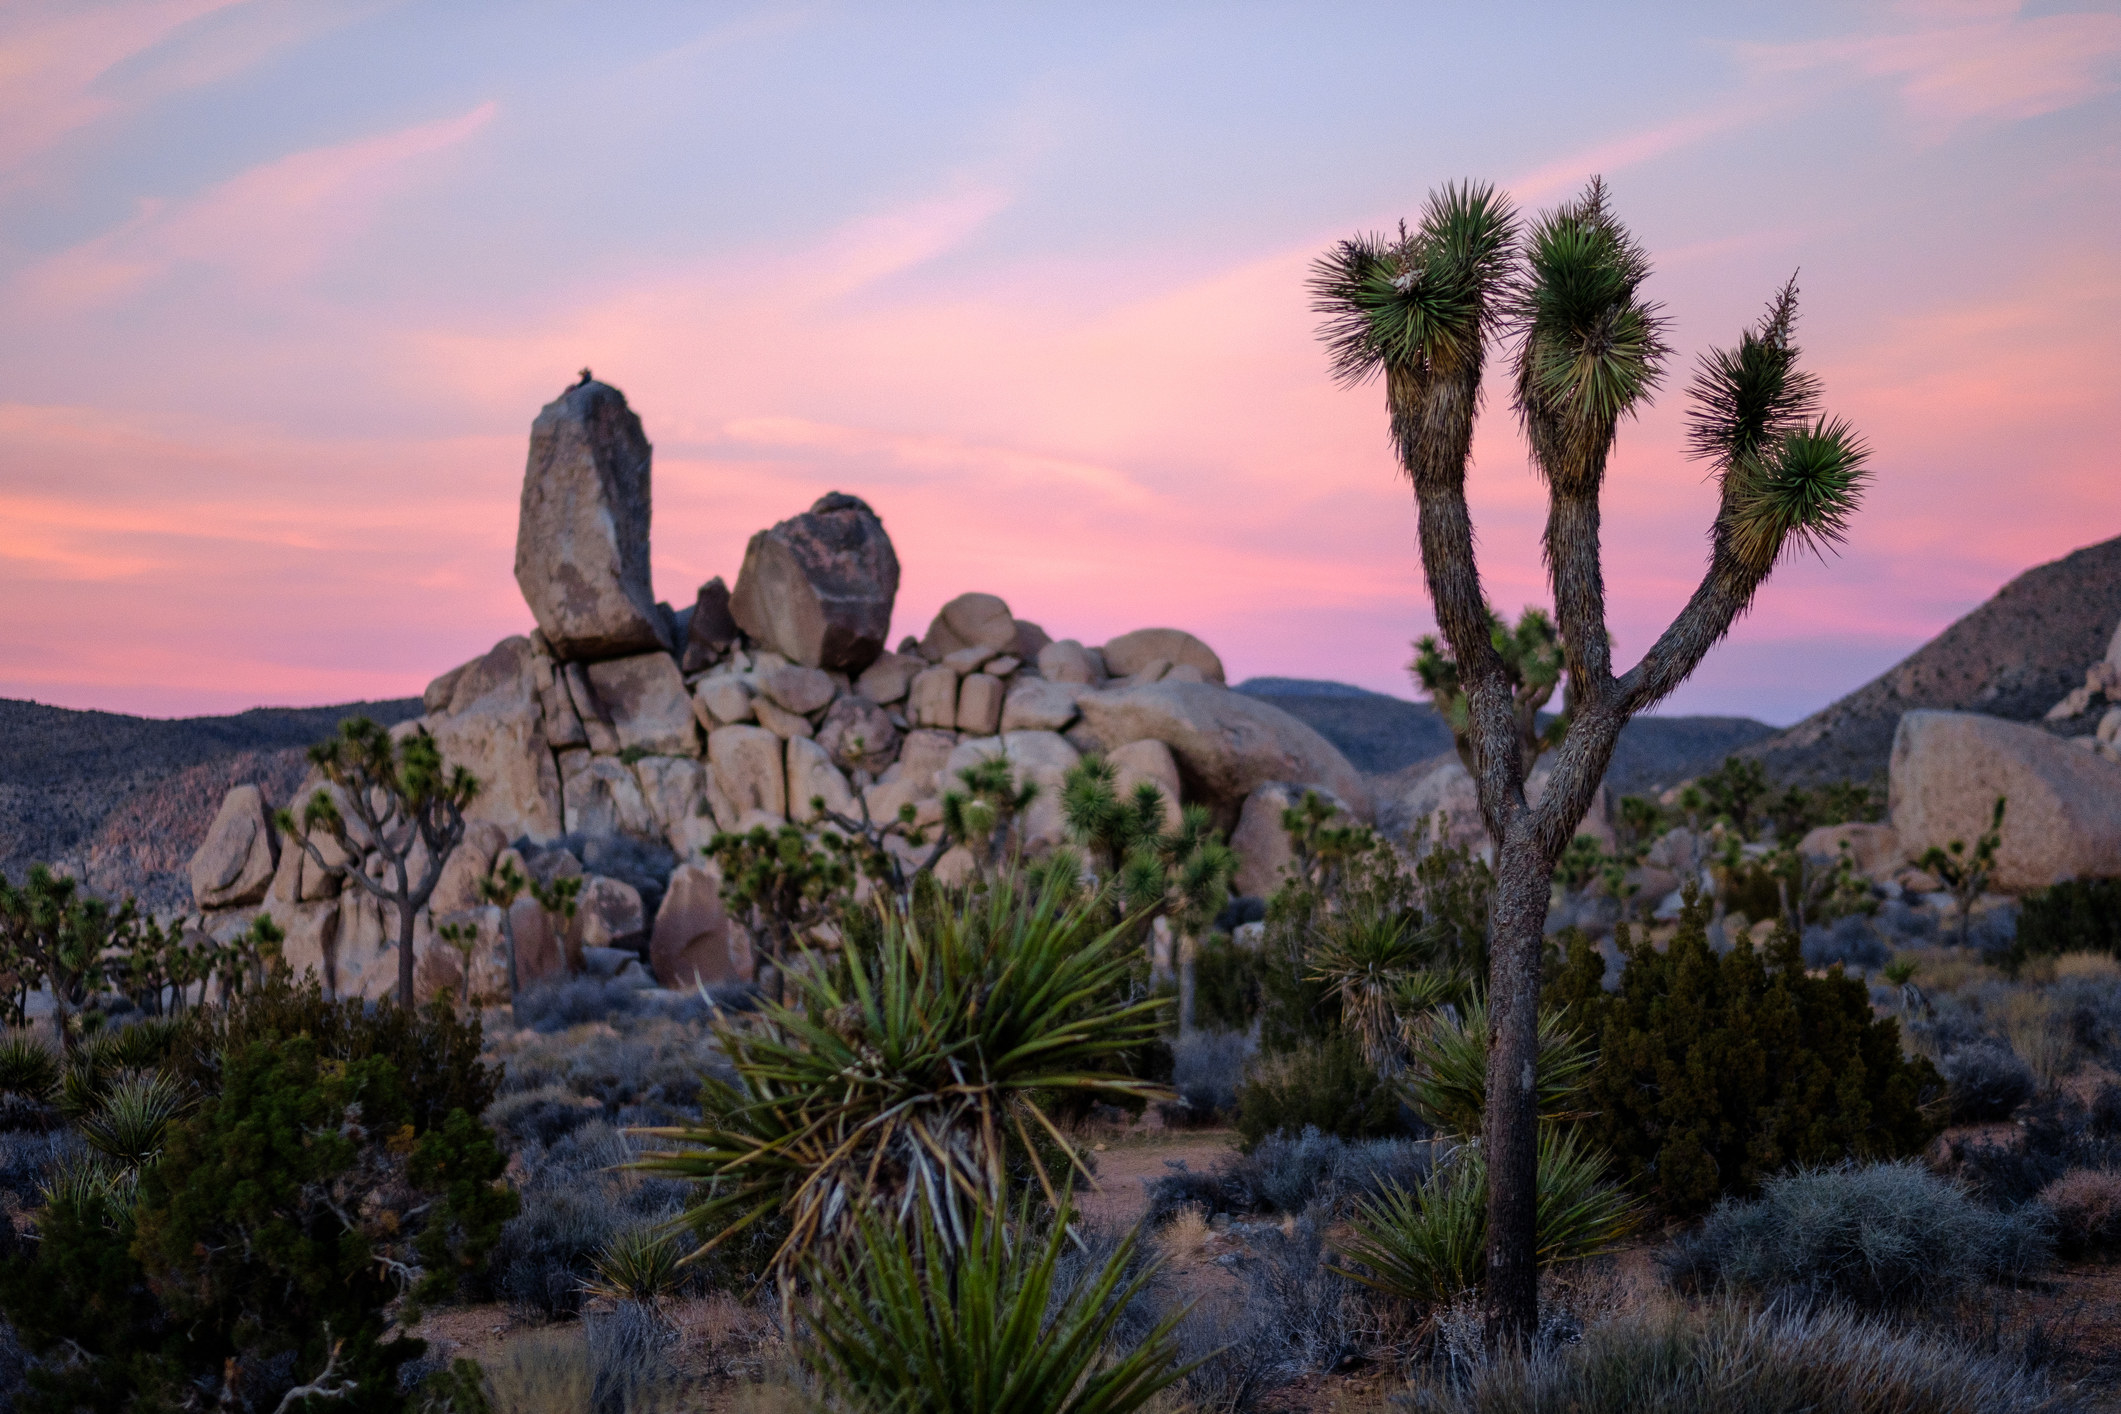 A sunset desert oasis with rocks and cactuses.